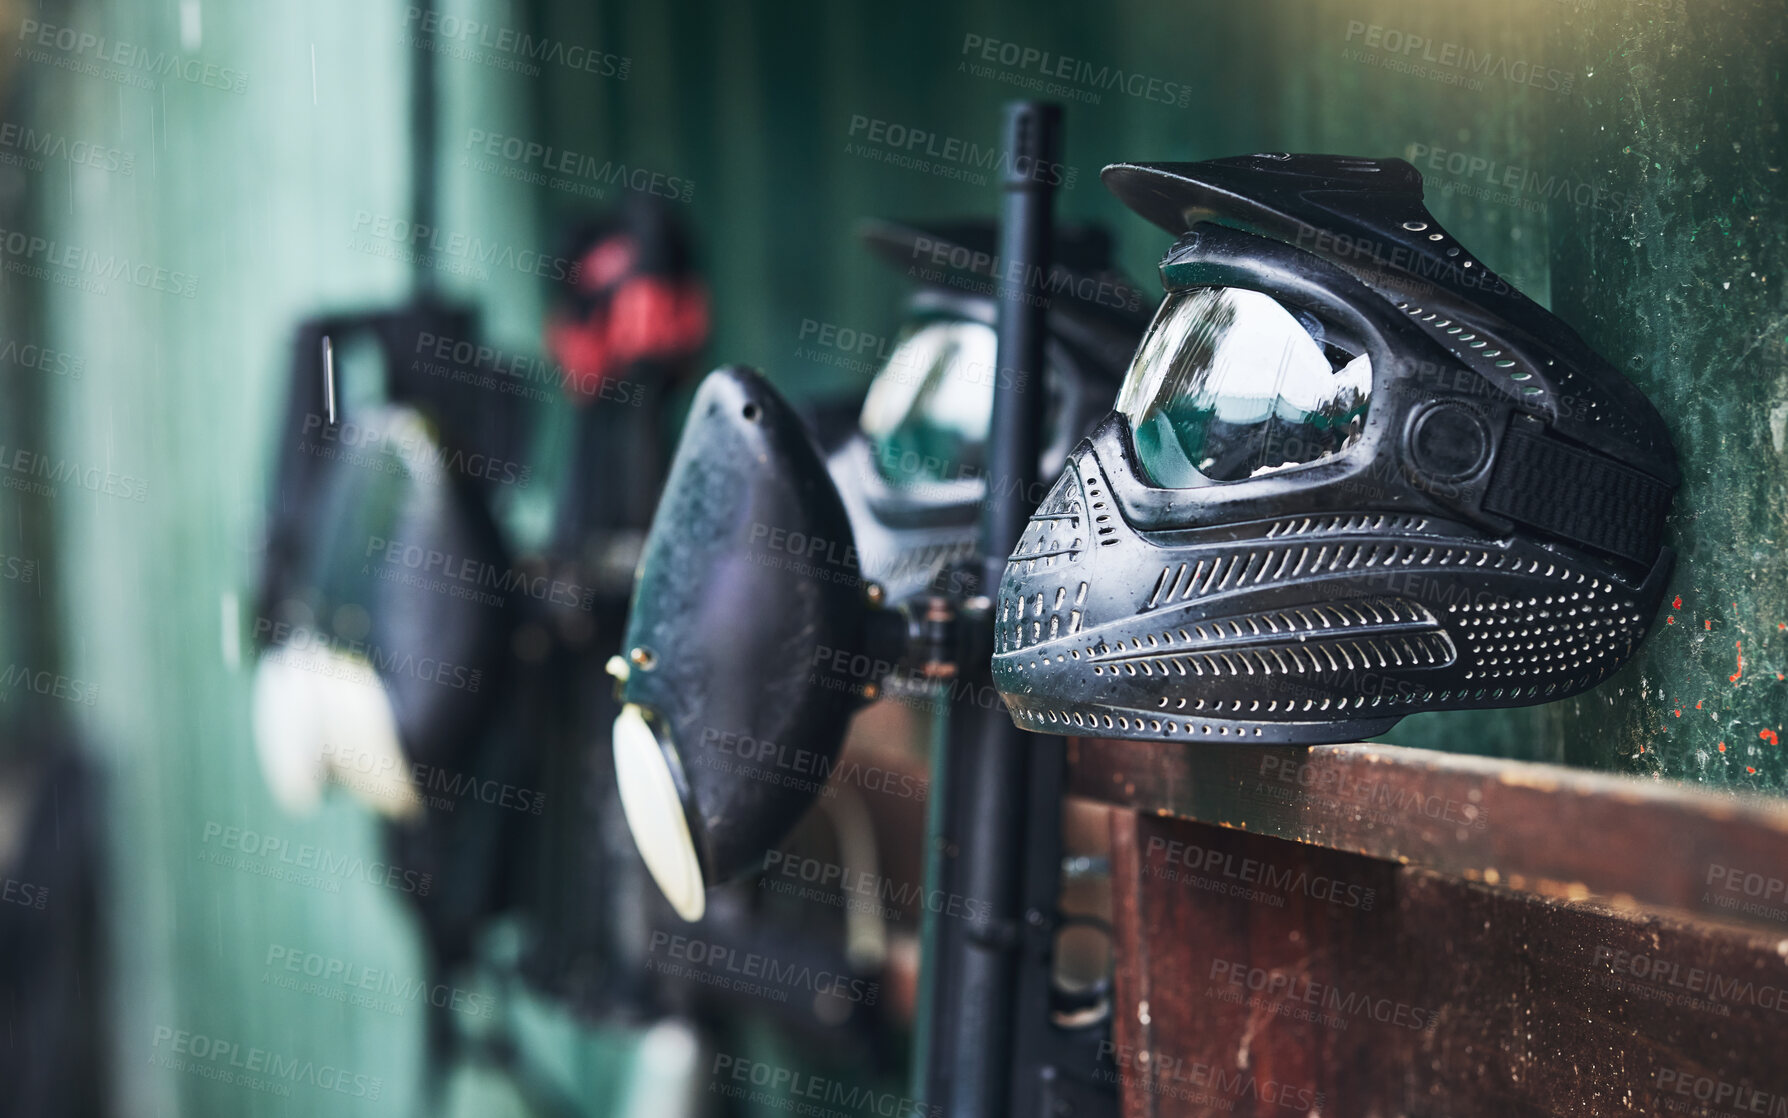 Buy stock photo Paintball, equipment and helmets or mask for protection for sports, competition or fun game. Sport, paint ball and safety gear for a recreation battle or competitive match by an outdoor battlefield.